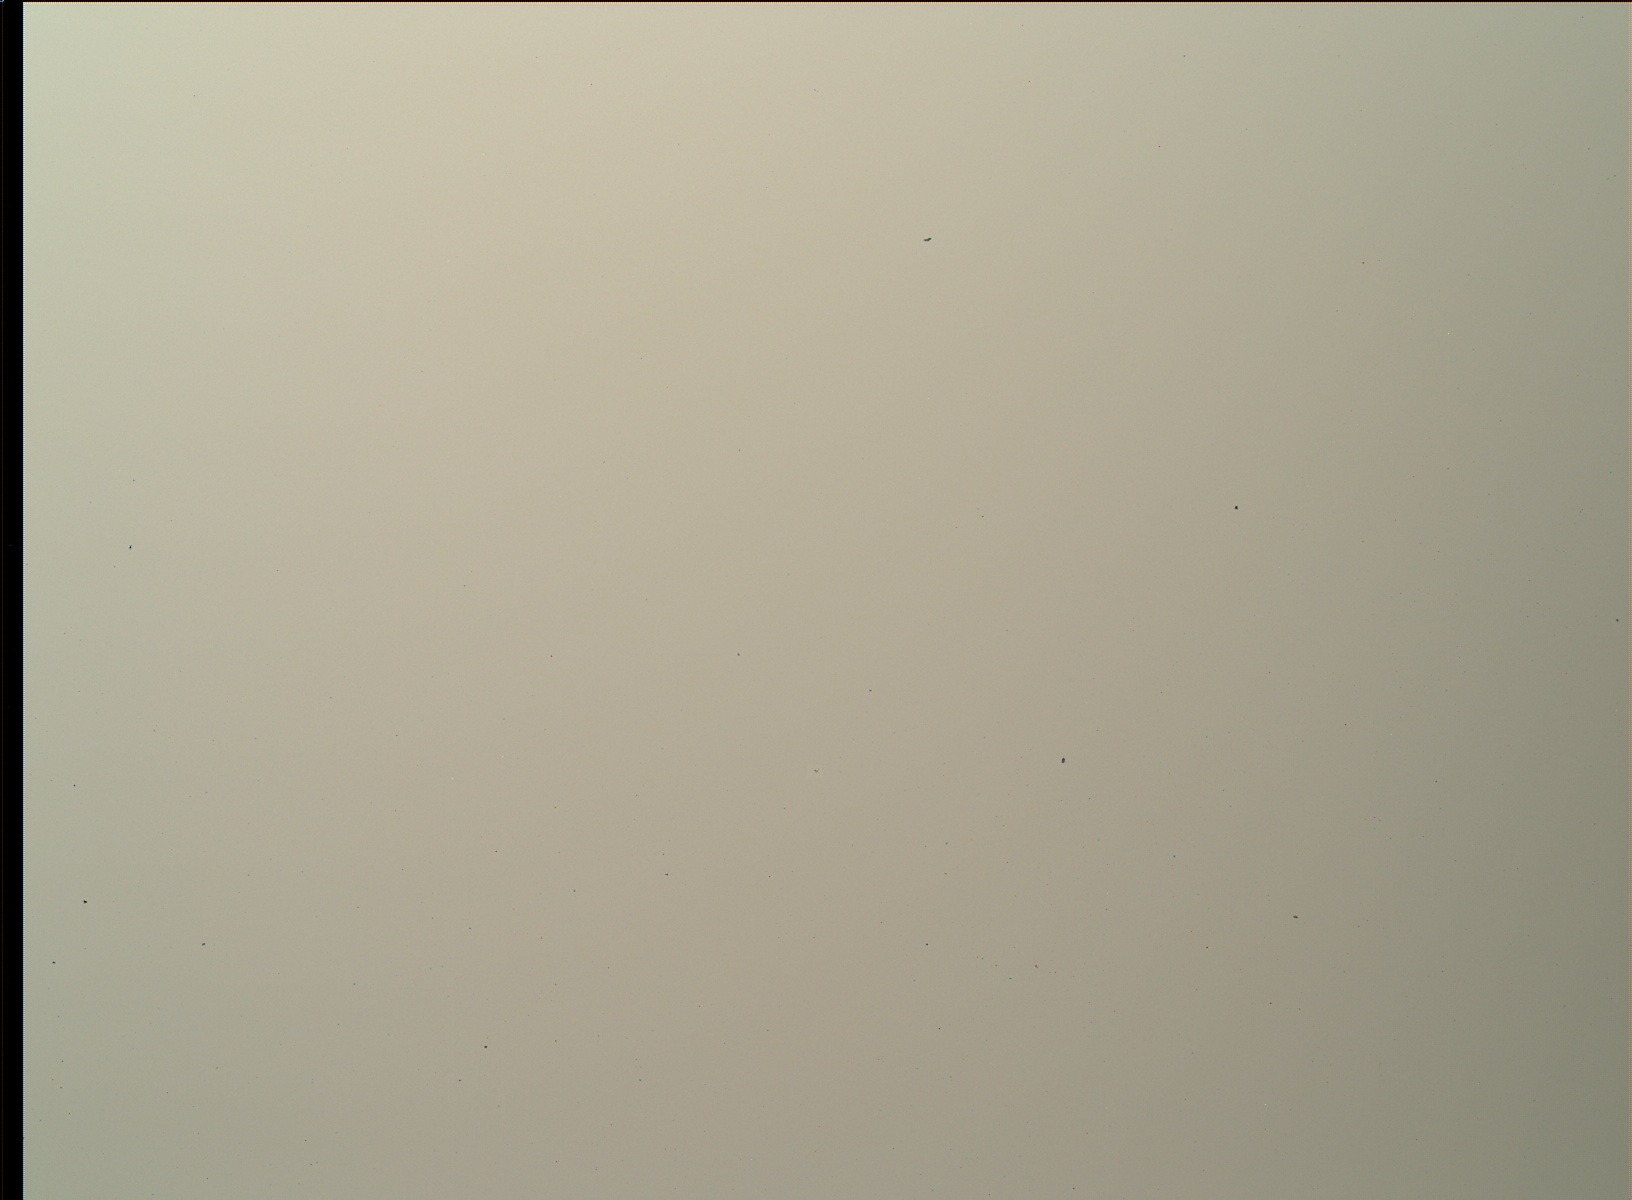 Nasa's Mars rover Curiosity acquired this image using its Mars Hand Lens Imager (MAHLI) on Sol 3085